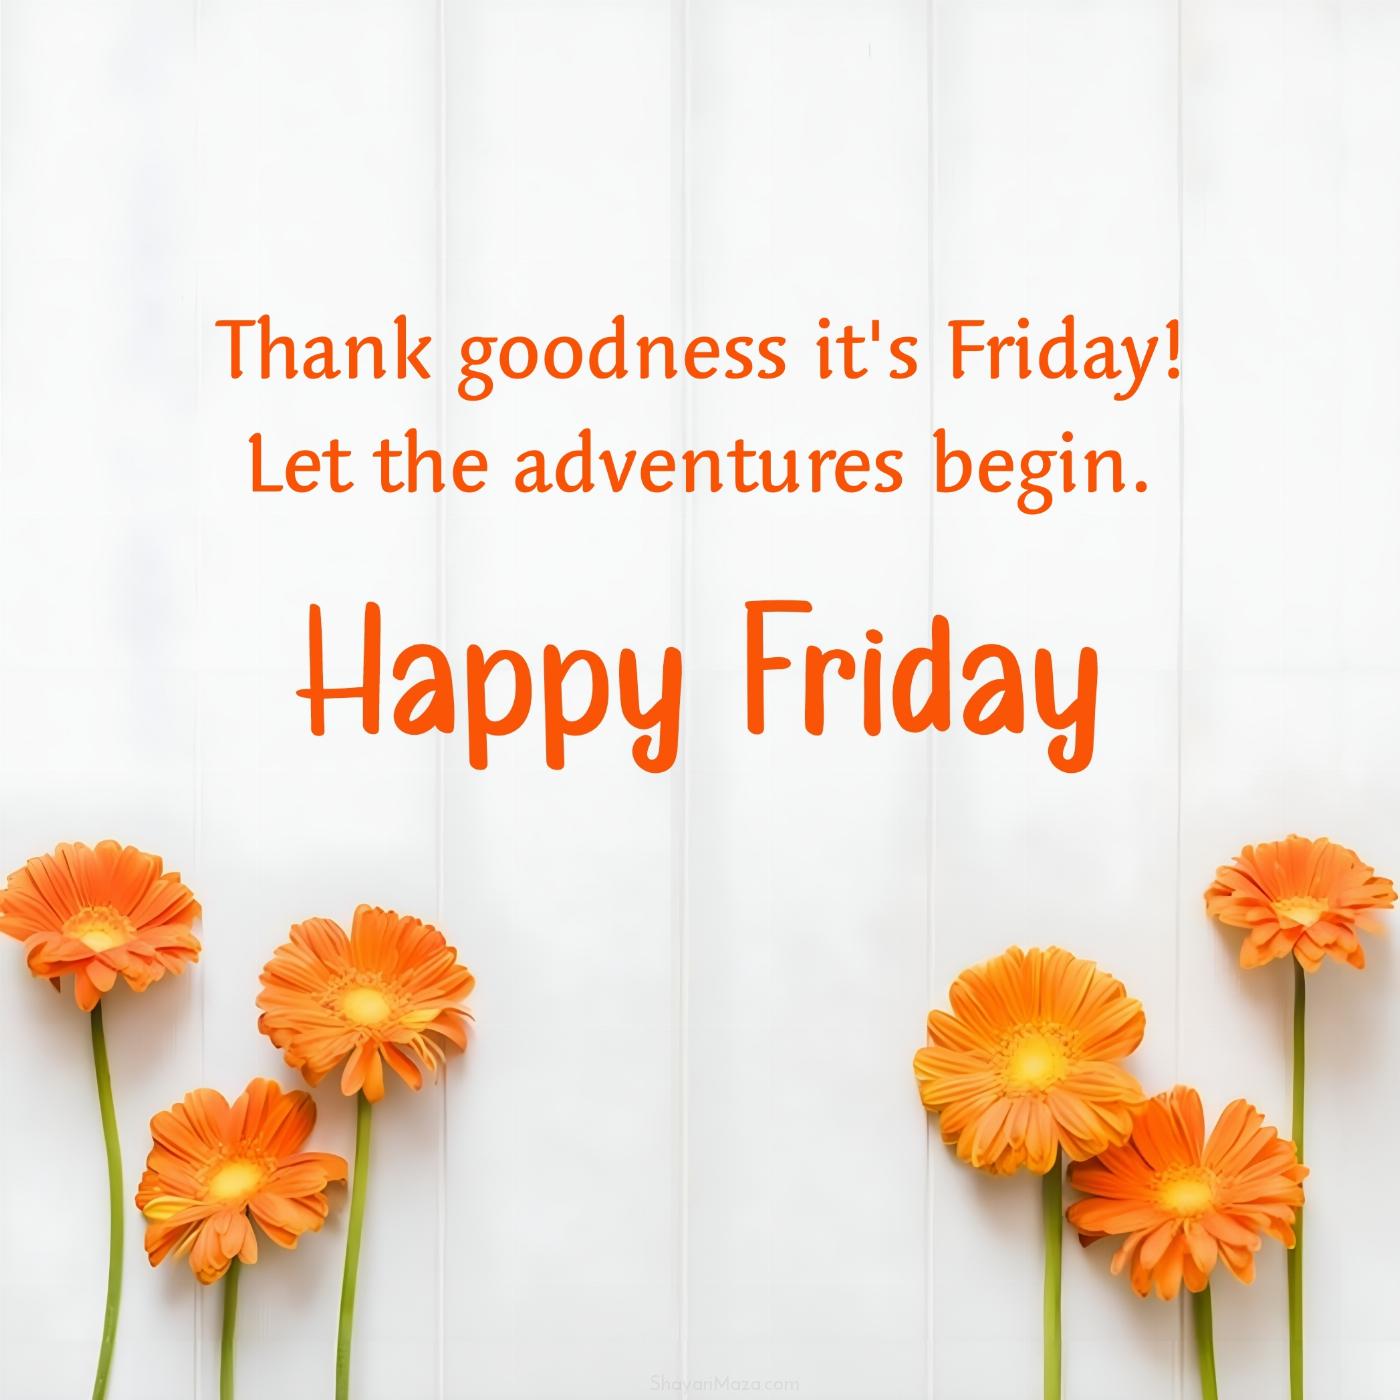 Thank goodness it's Friday! Let the adventures begin